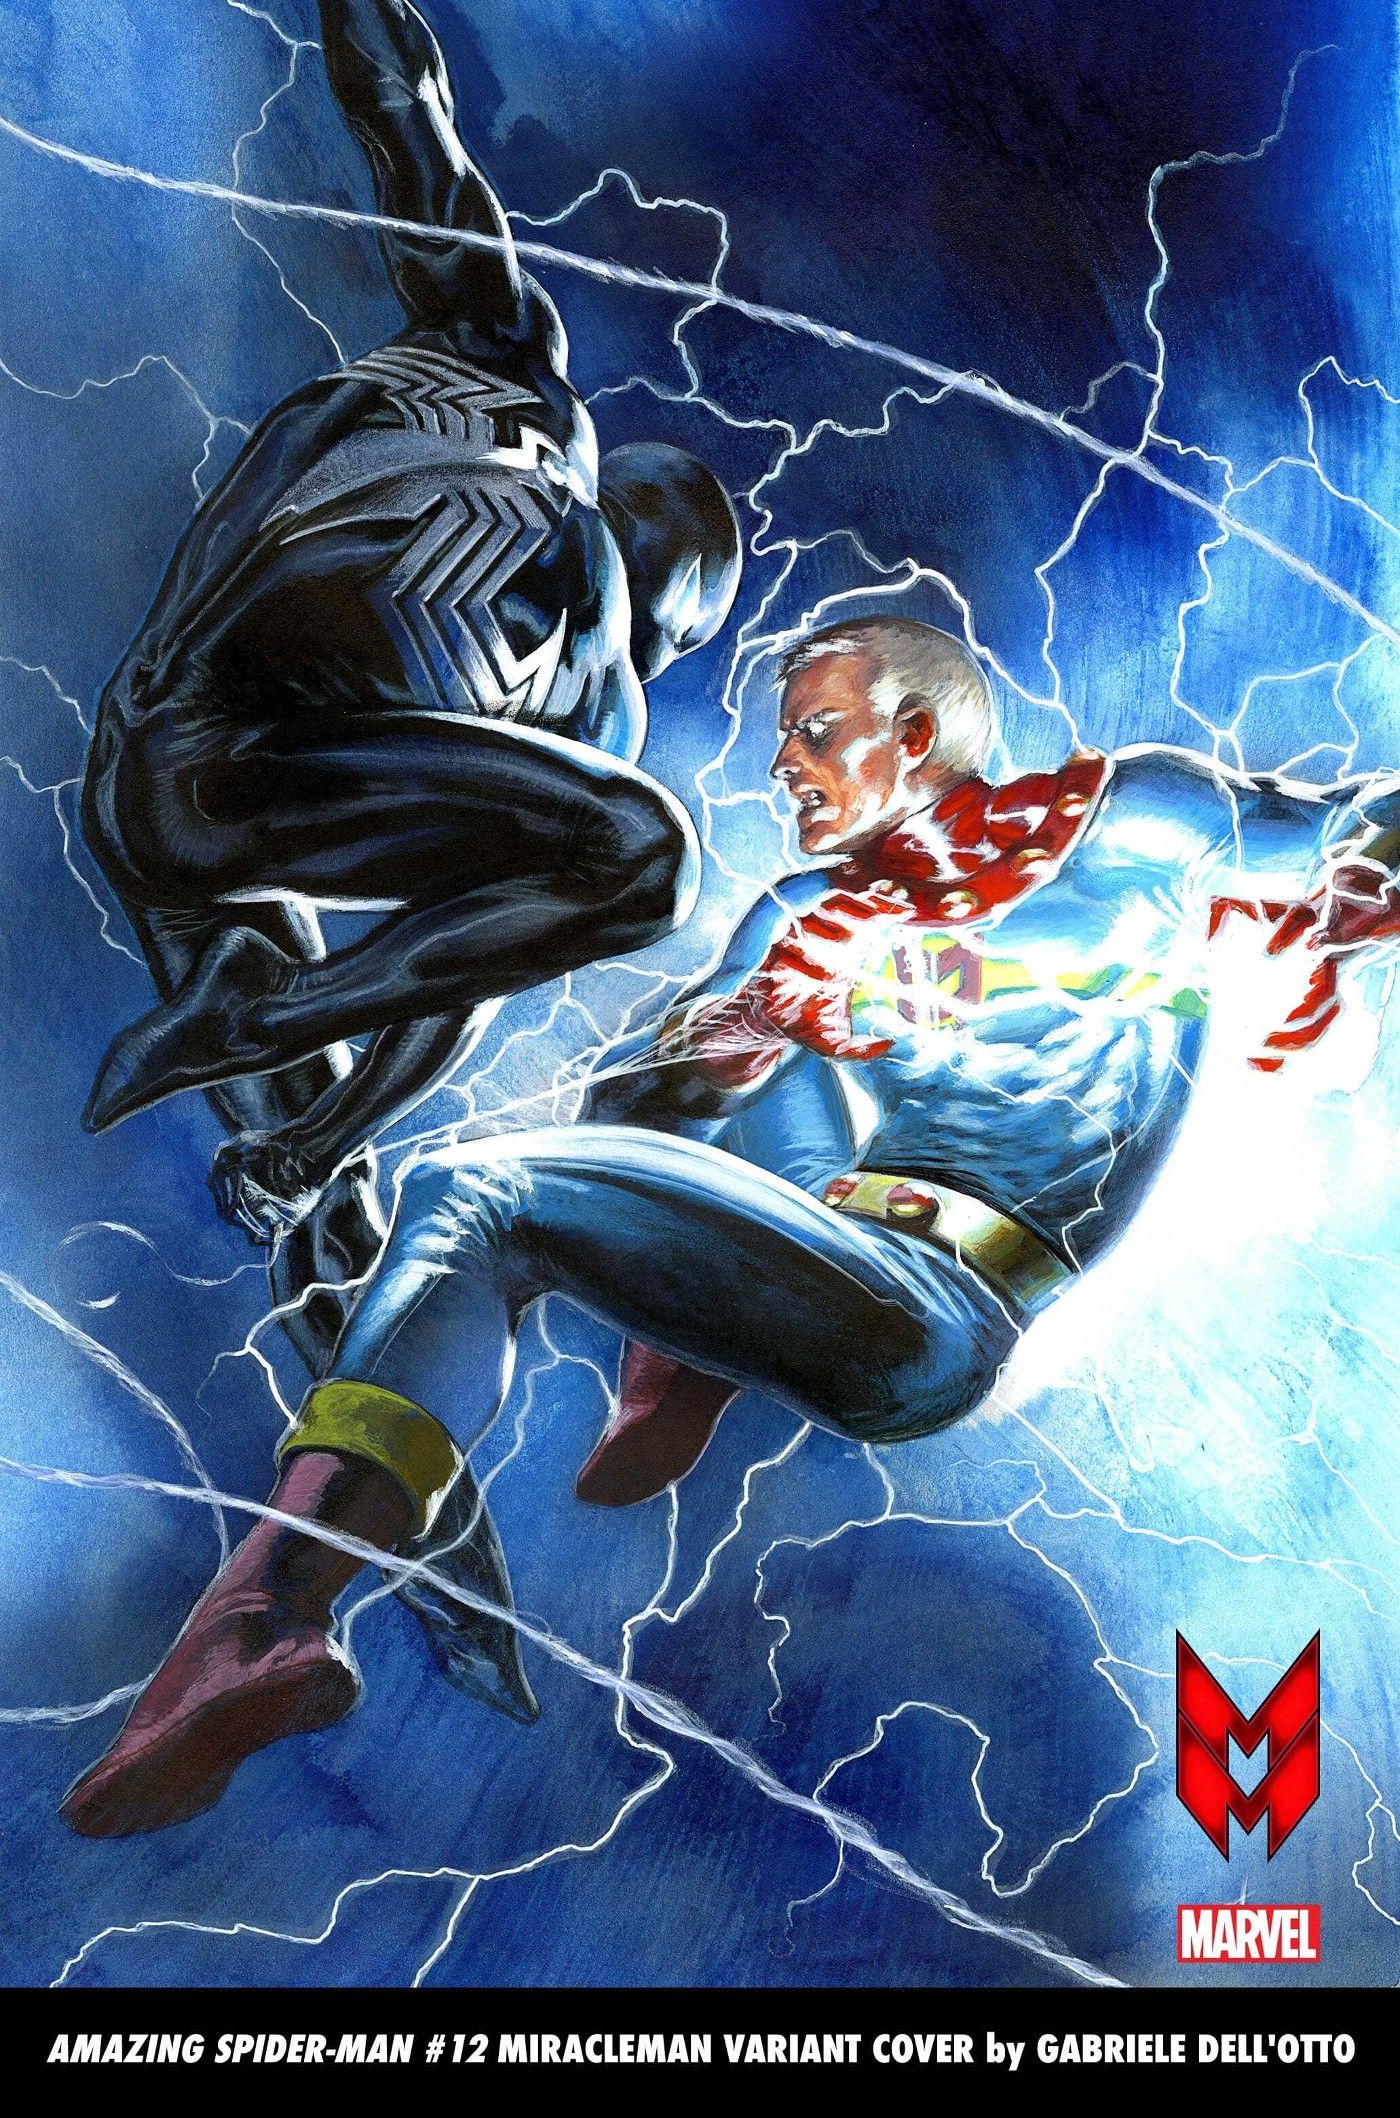 AMAZING SPIDER-MAN 12 MIRACLEMAN VARIANT COVER by PATRICK GLEASON